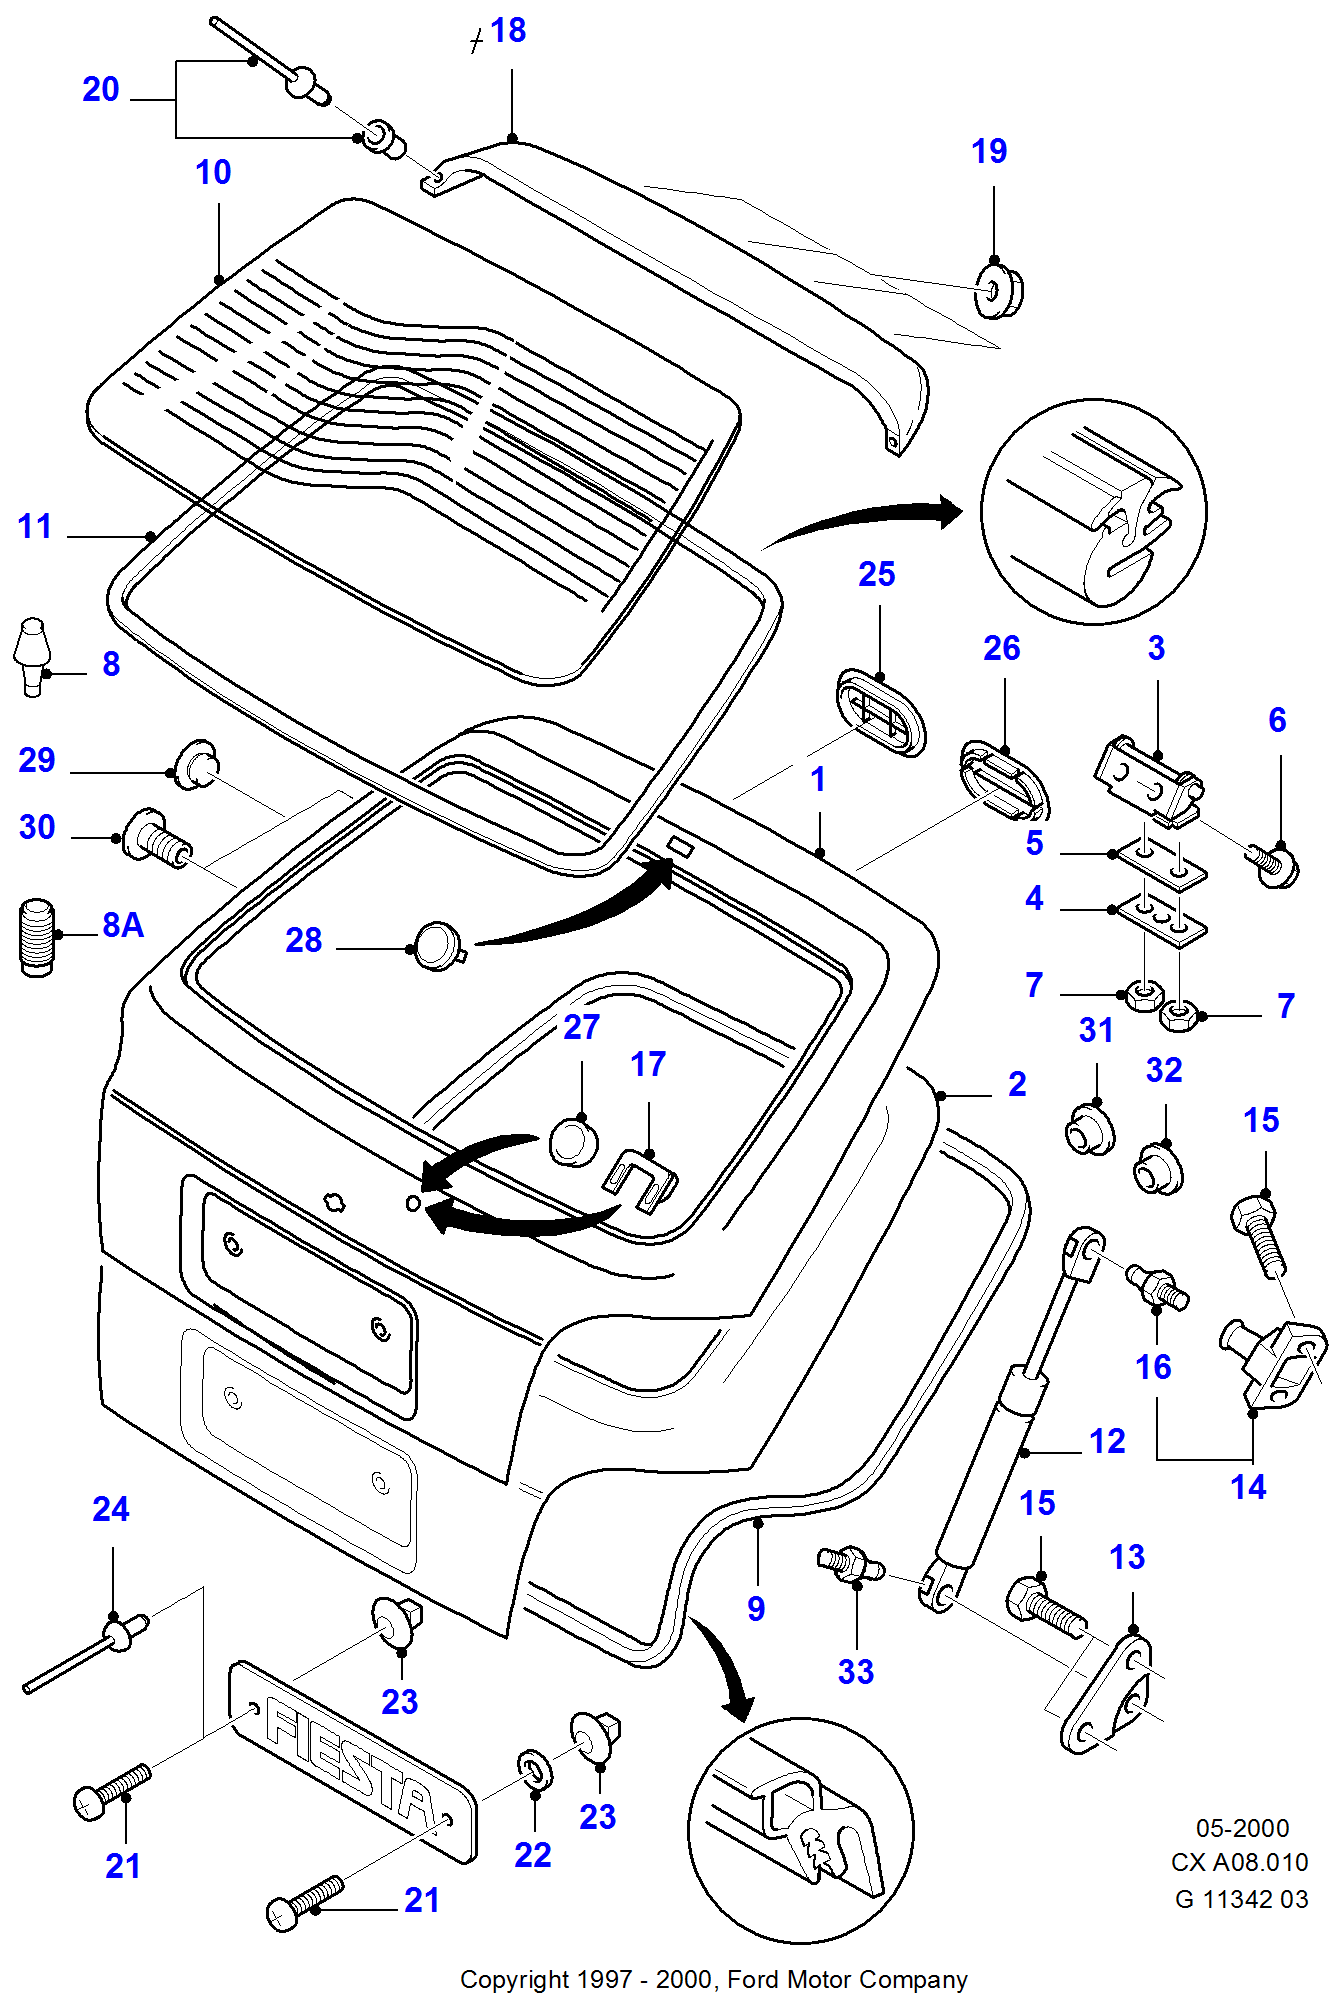 Tailgate And Related Parts Για Ford Fiesta Fiesta 1989-1996               (CX)